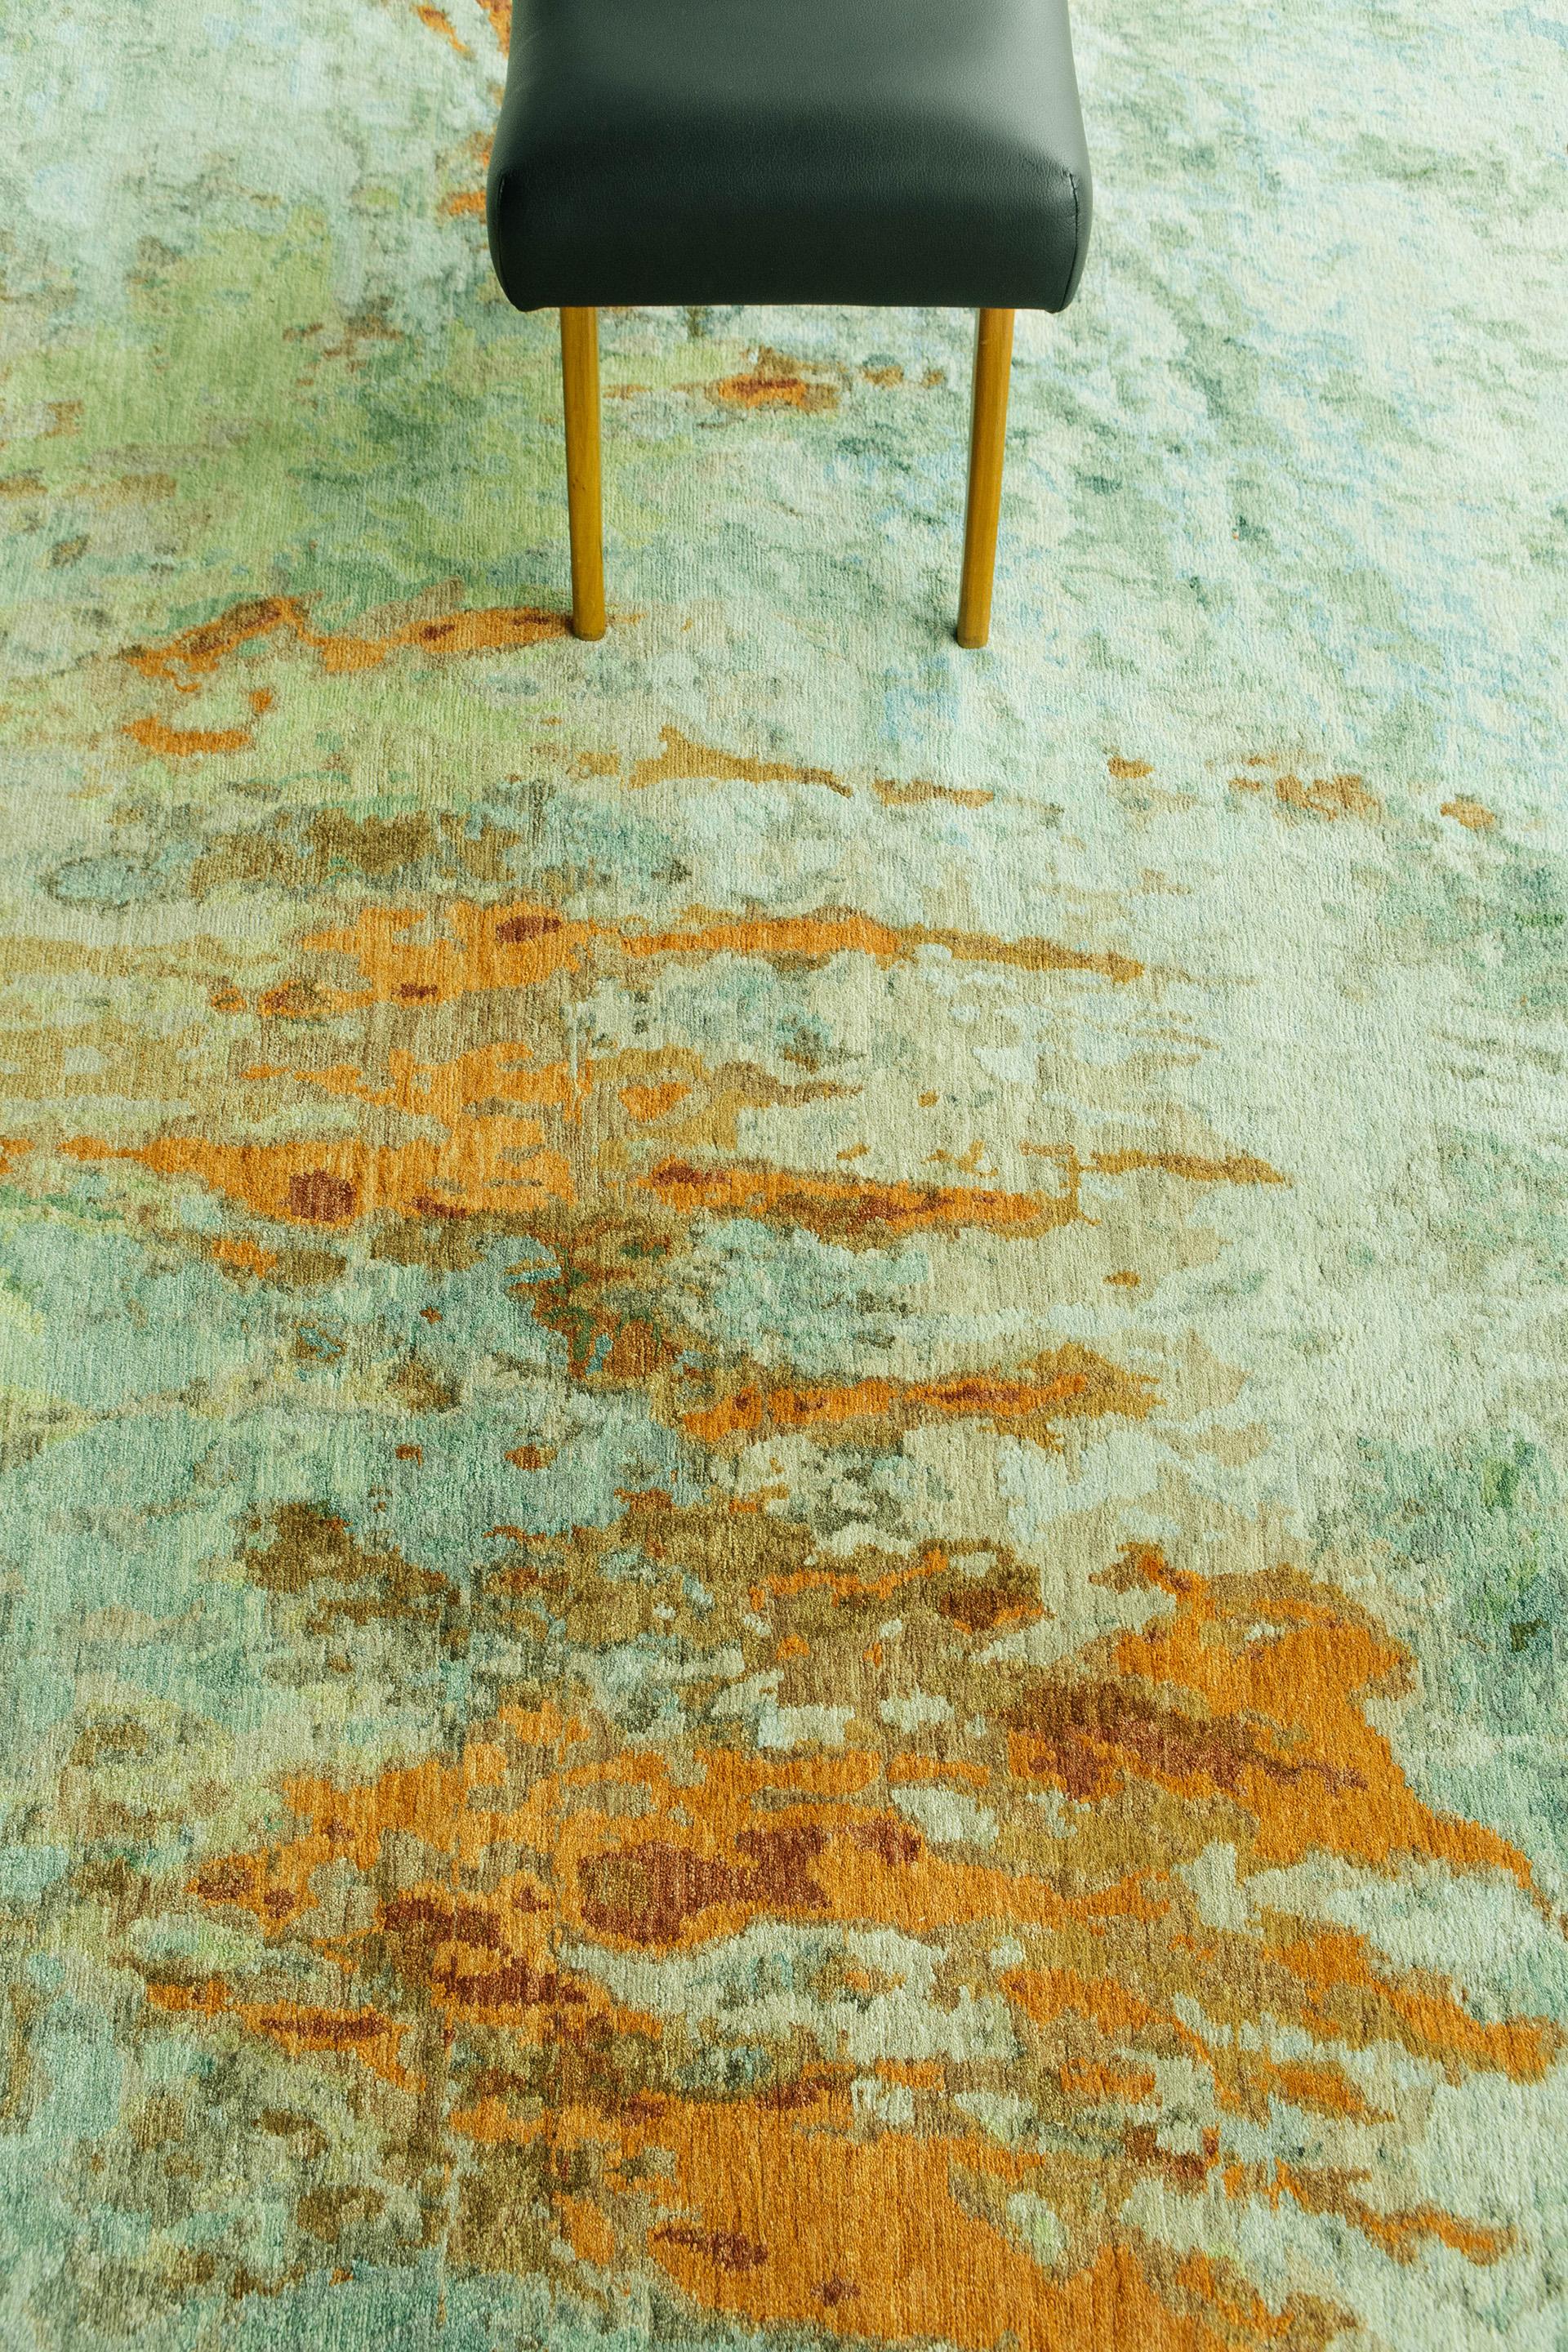 Various green colors and spontaneous strokes of amber and rust keep your eye engaged when looking at this wool and silk piece. The complementary colors bring a unique and inviting appeal to this earth-toned rug.

Rug number 26002
Size: 9' 0